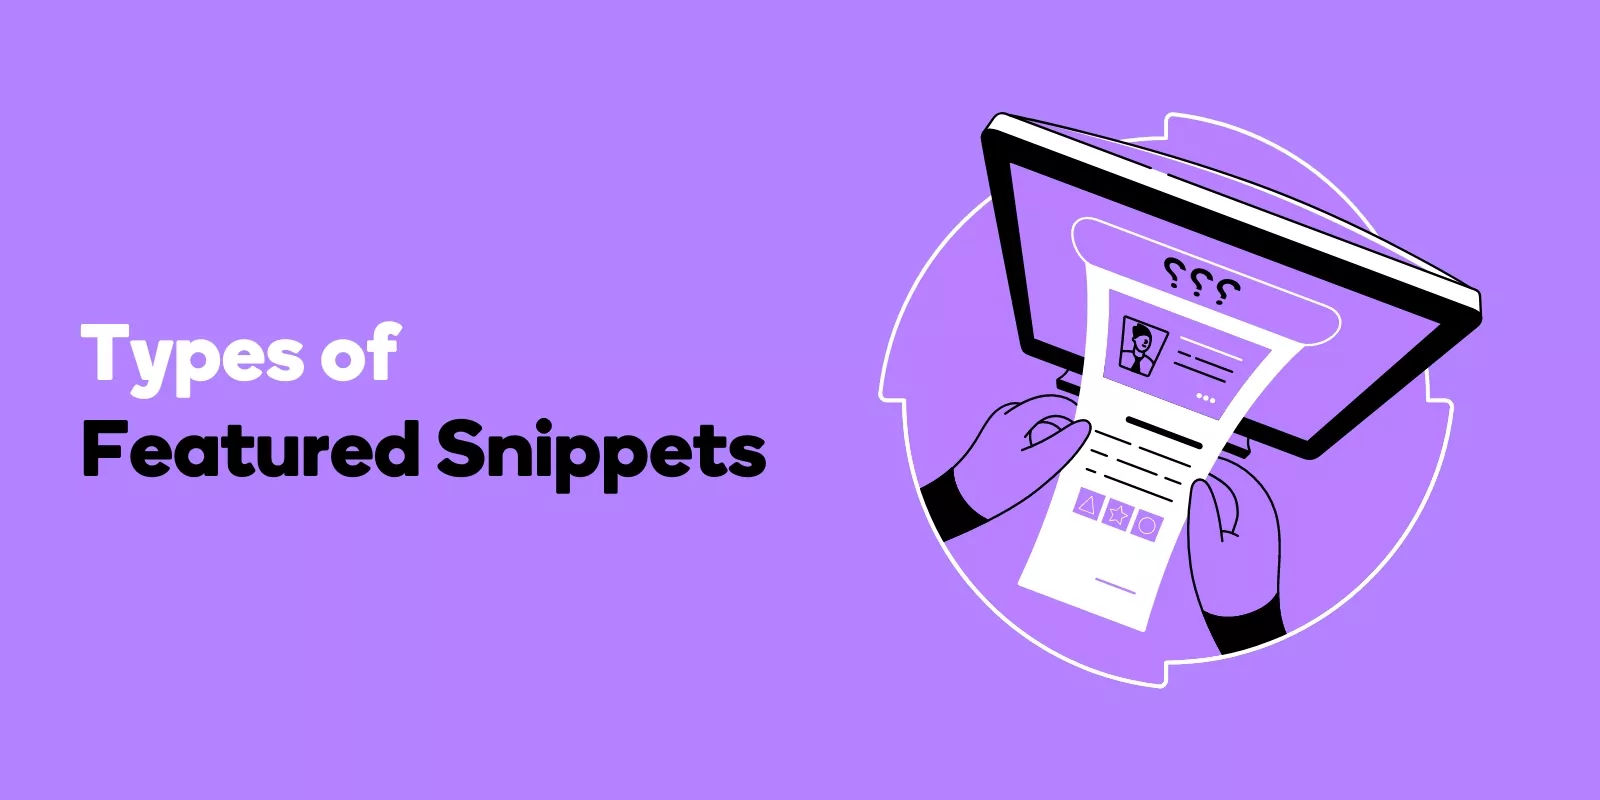 Types of Featured Snippets